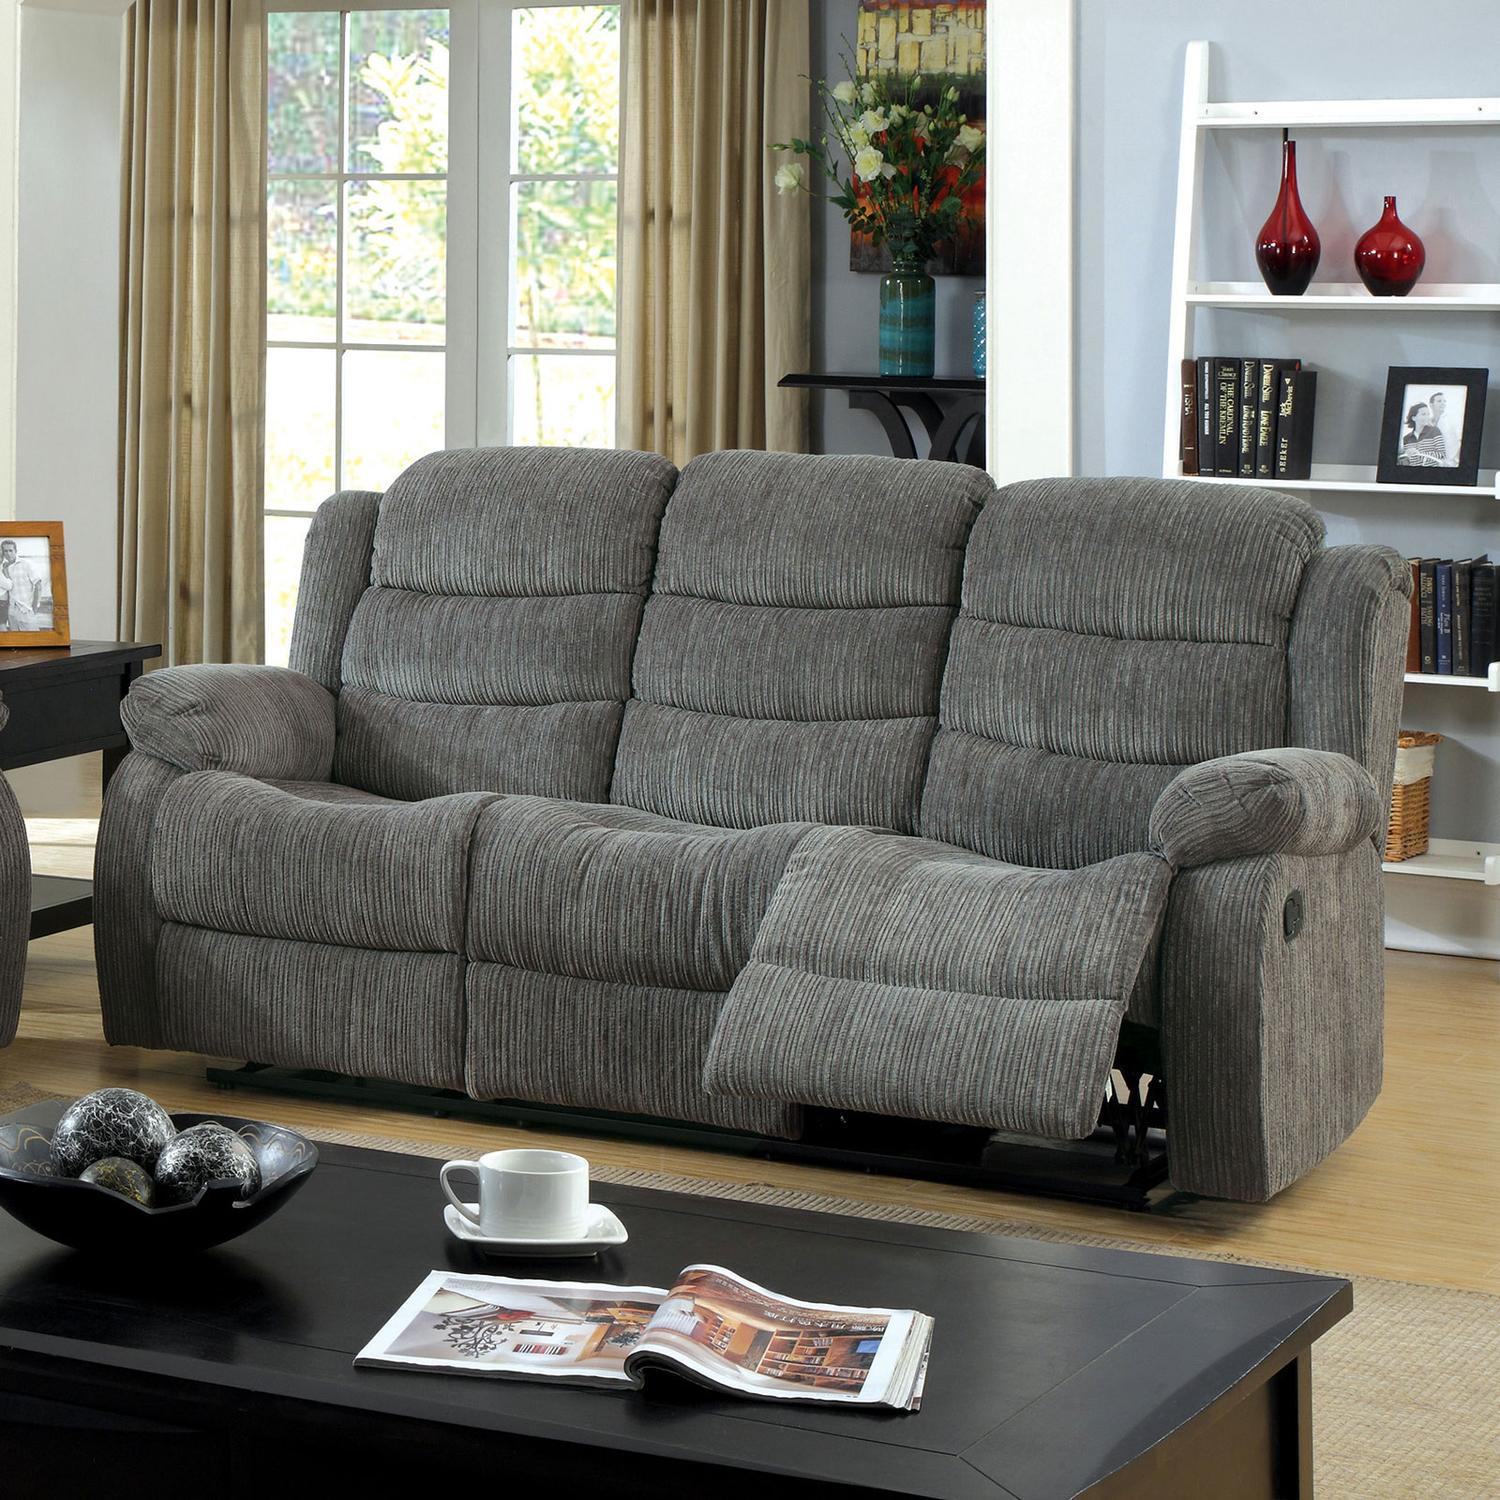 Furniture of America MILLVILLE CM6173GY-SF Recliner Sofa